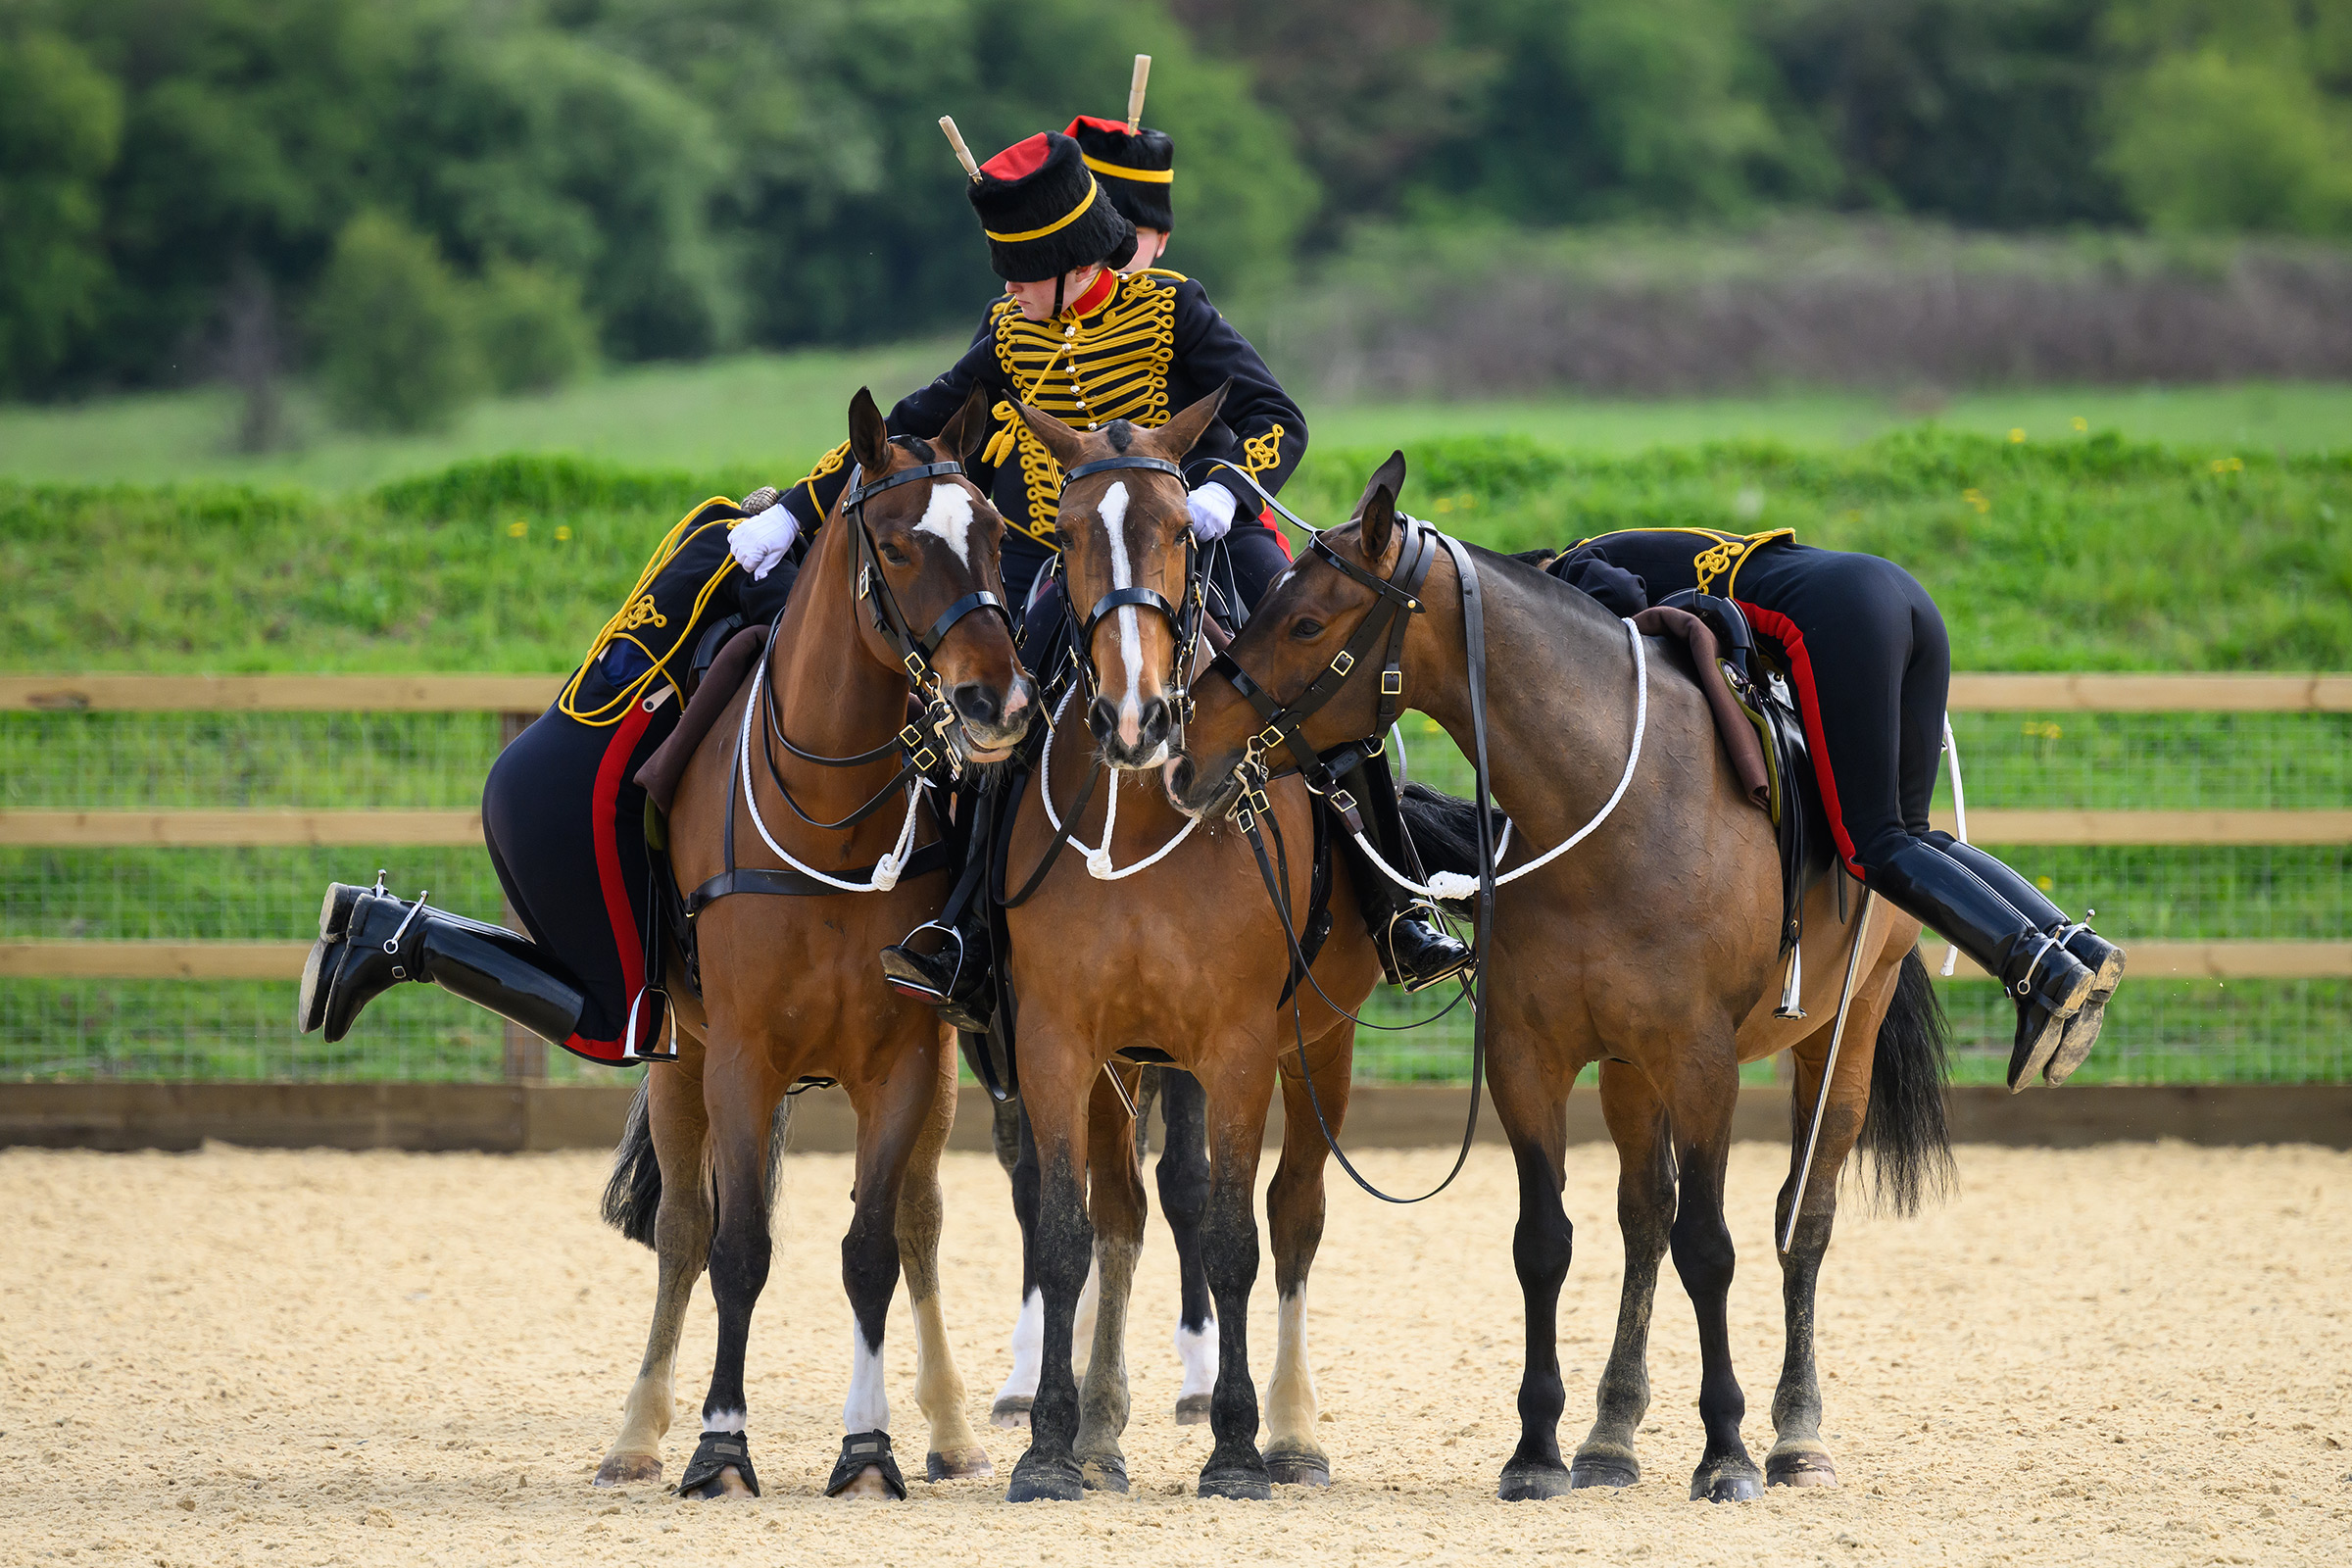 Soldiers from The Kings Troop Royal Horse Artillery remount their horses as they take part in the riding assessment needed to ride in ceremonial parades, on April 24.